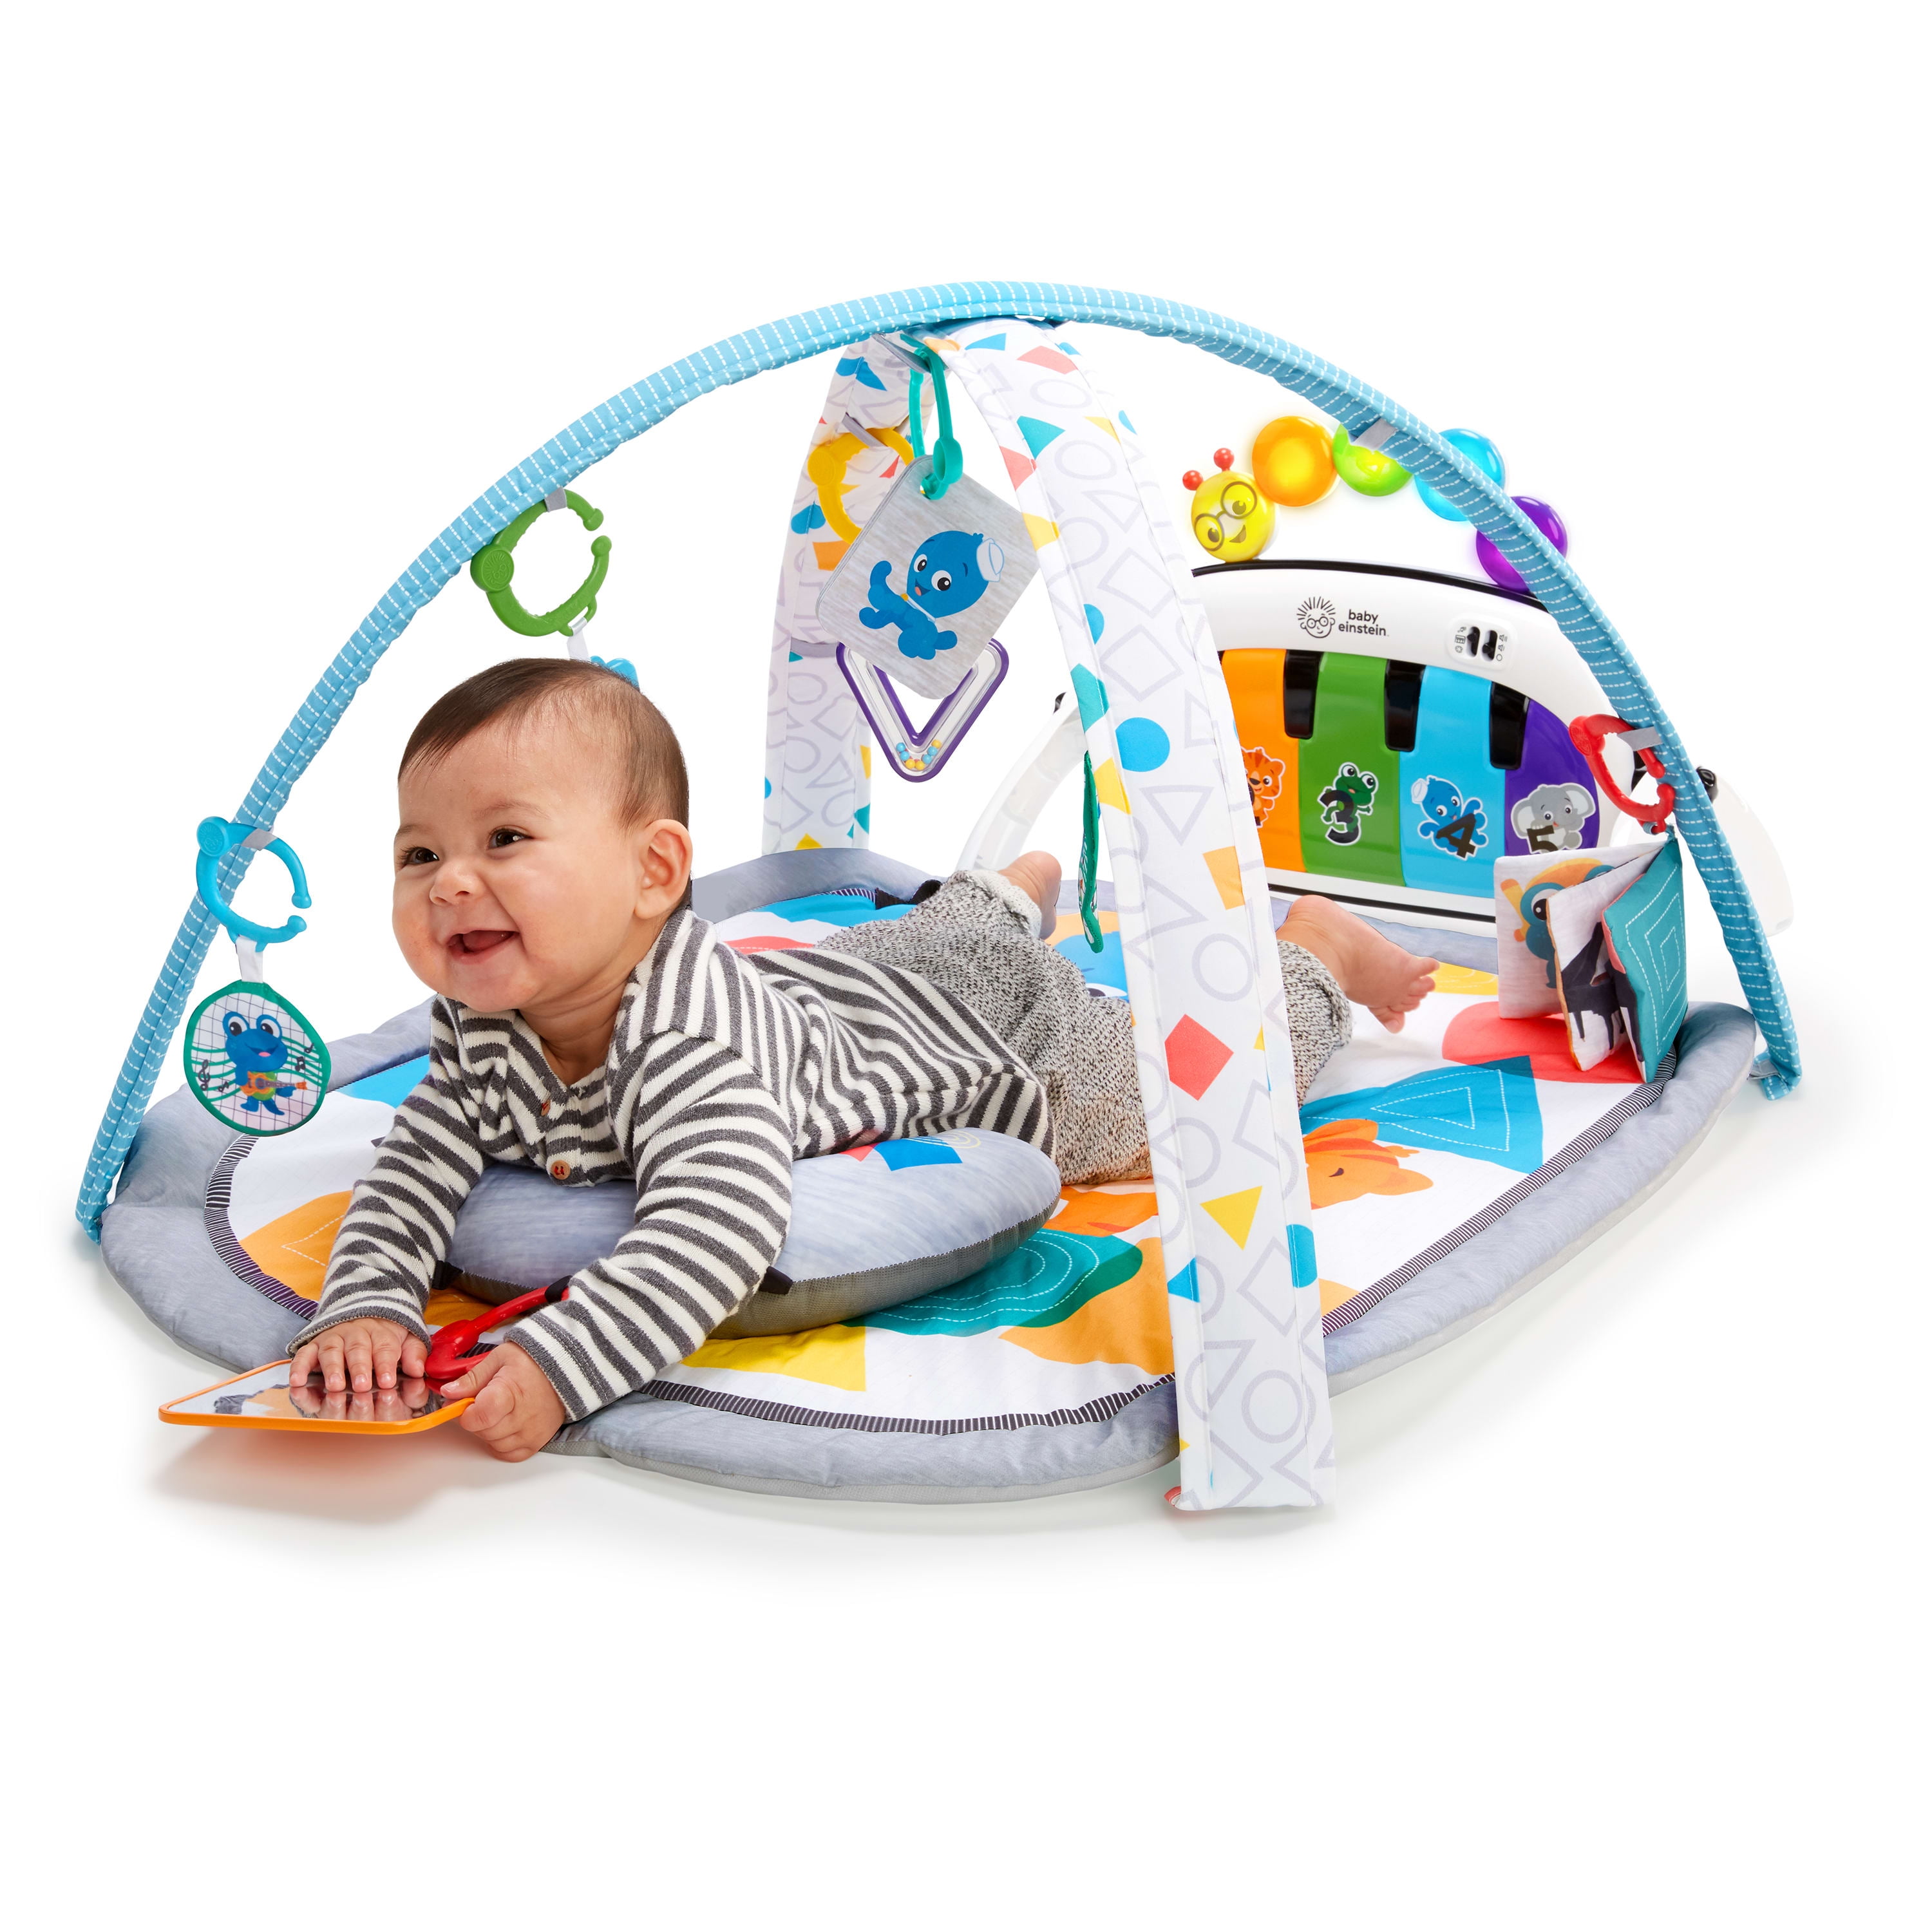 Baby Einstein 4-in-1 Kickin' Tunes Music and Language Play Gym and Piano Tummy Time Activity Mat - 2